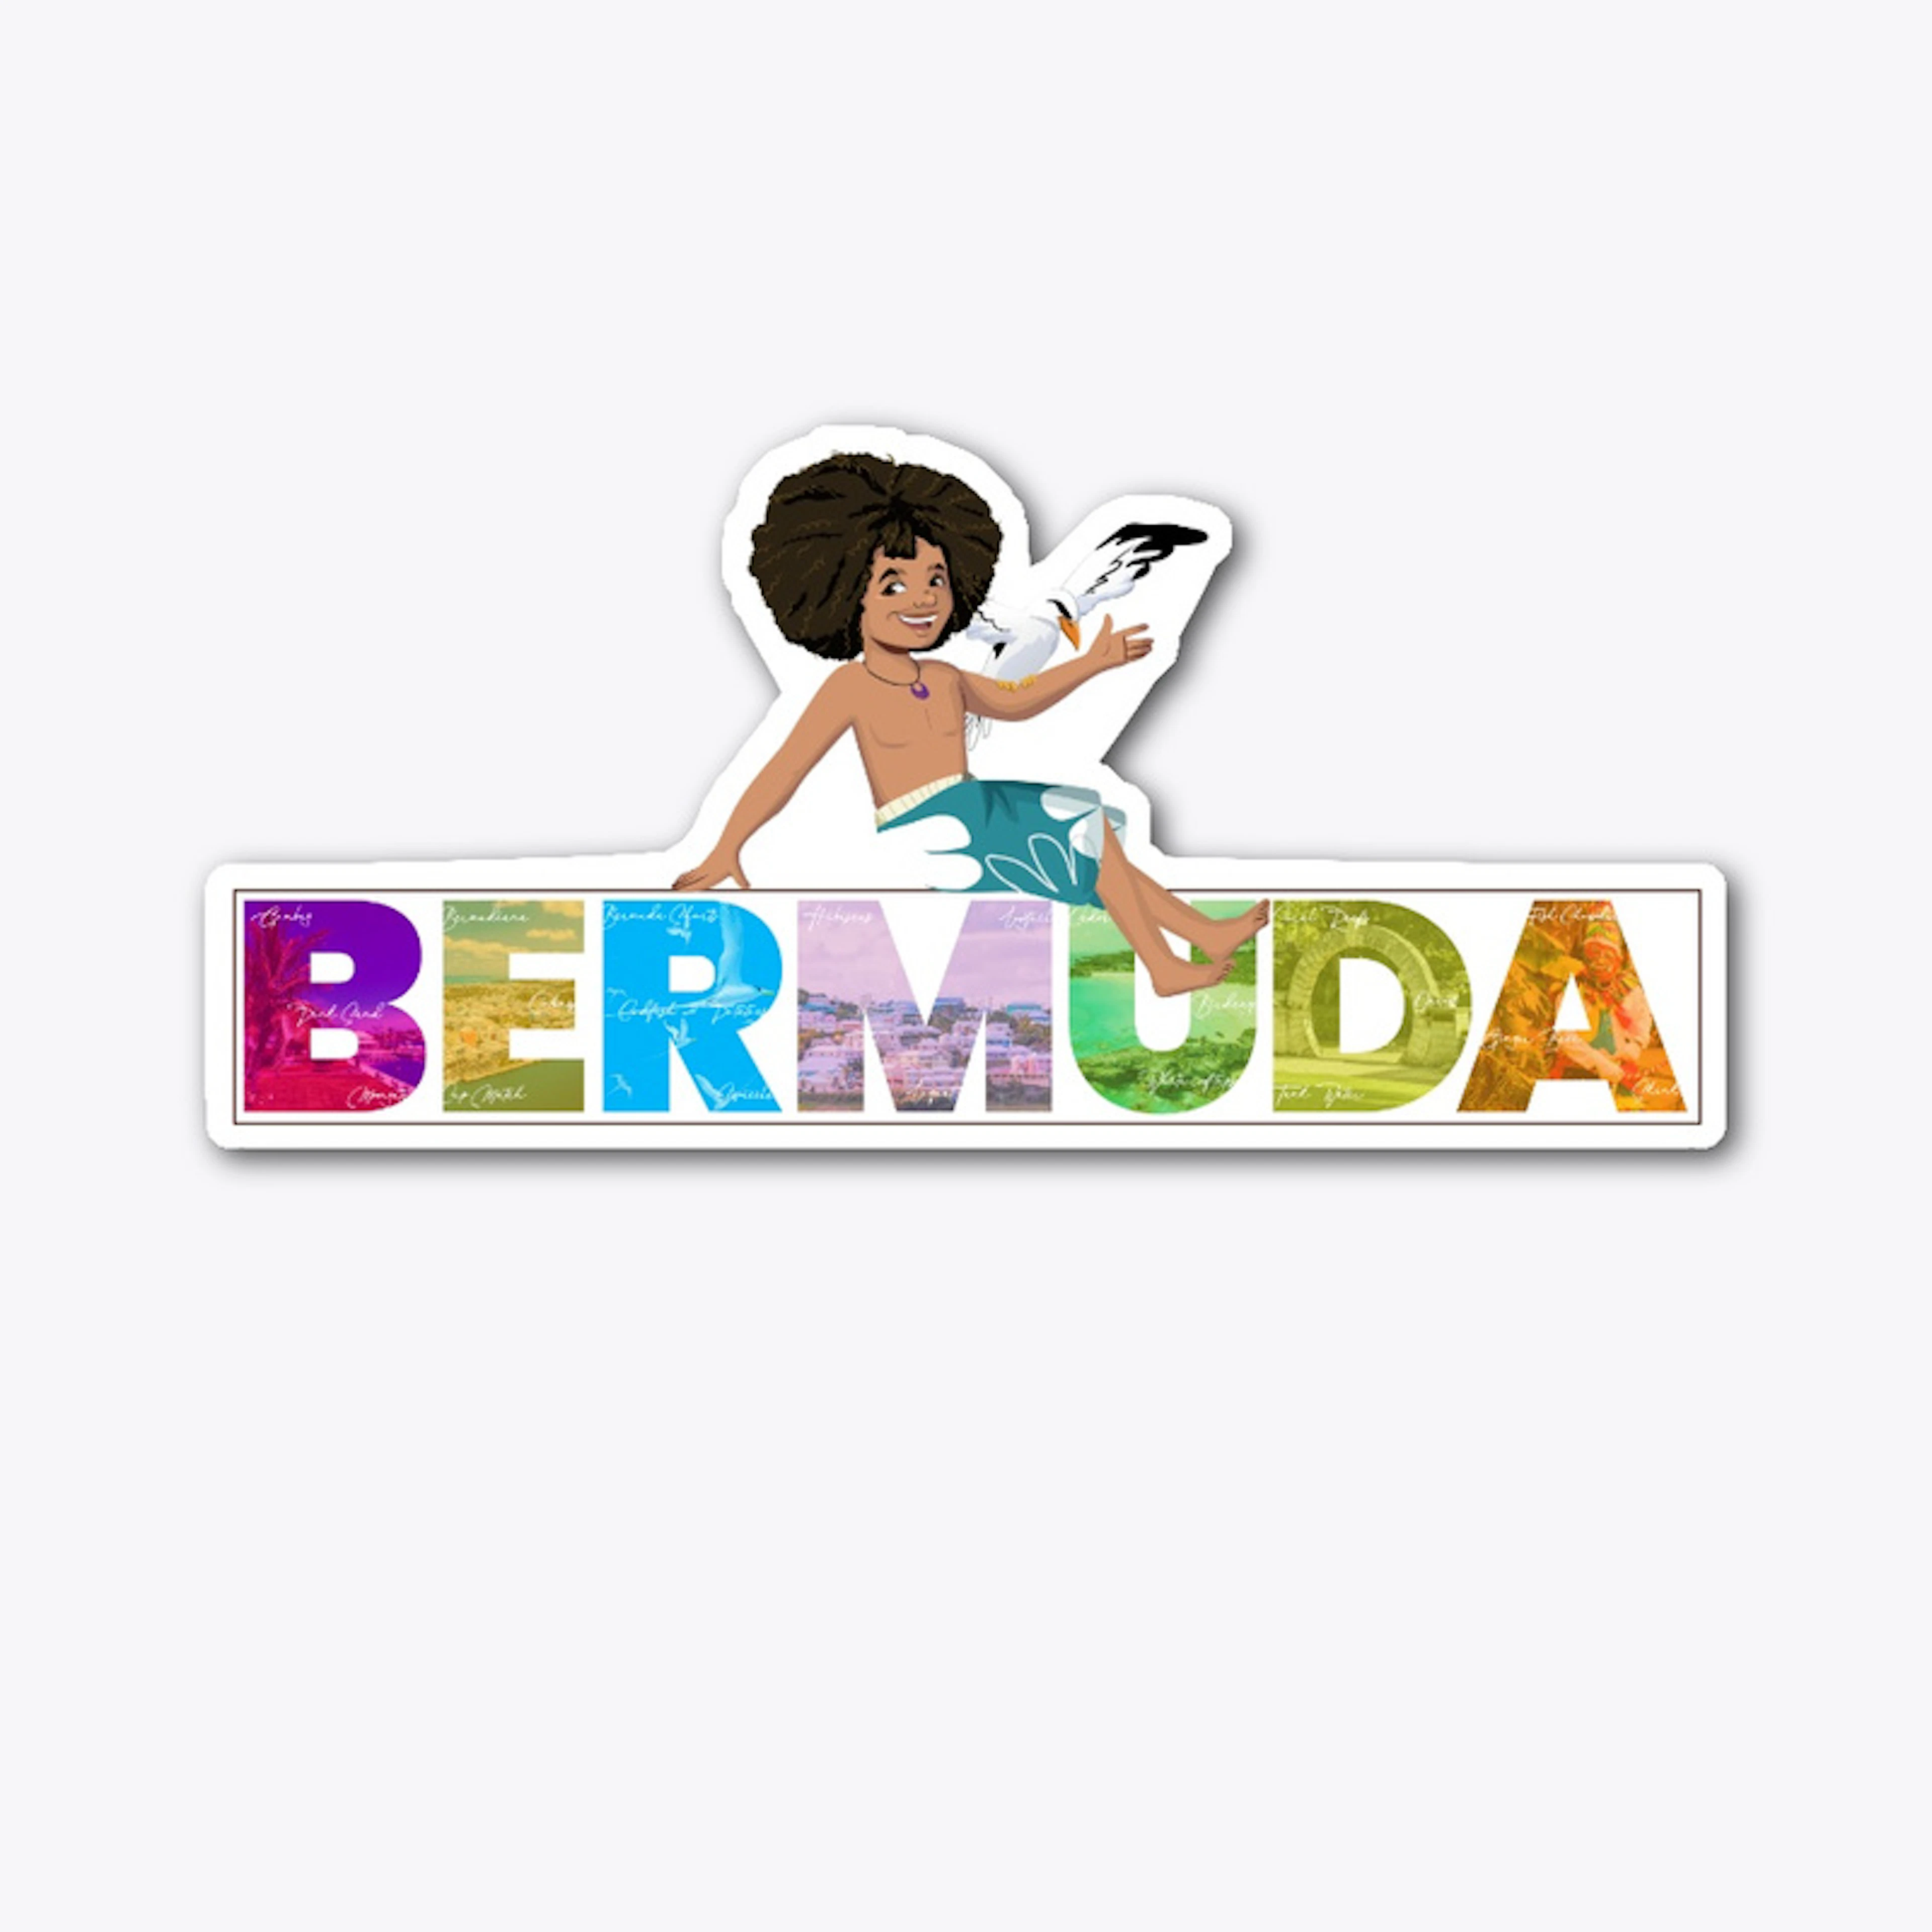 Official Bermuda Marquee V2